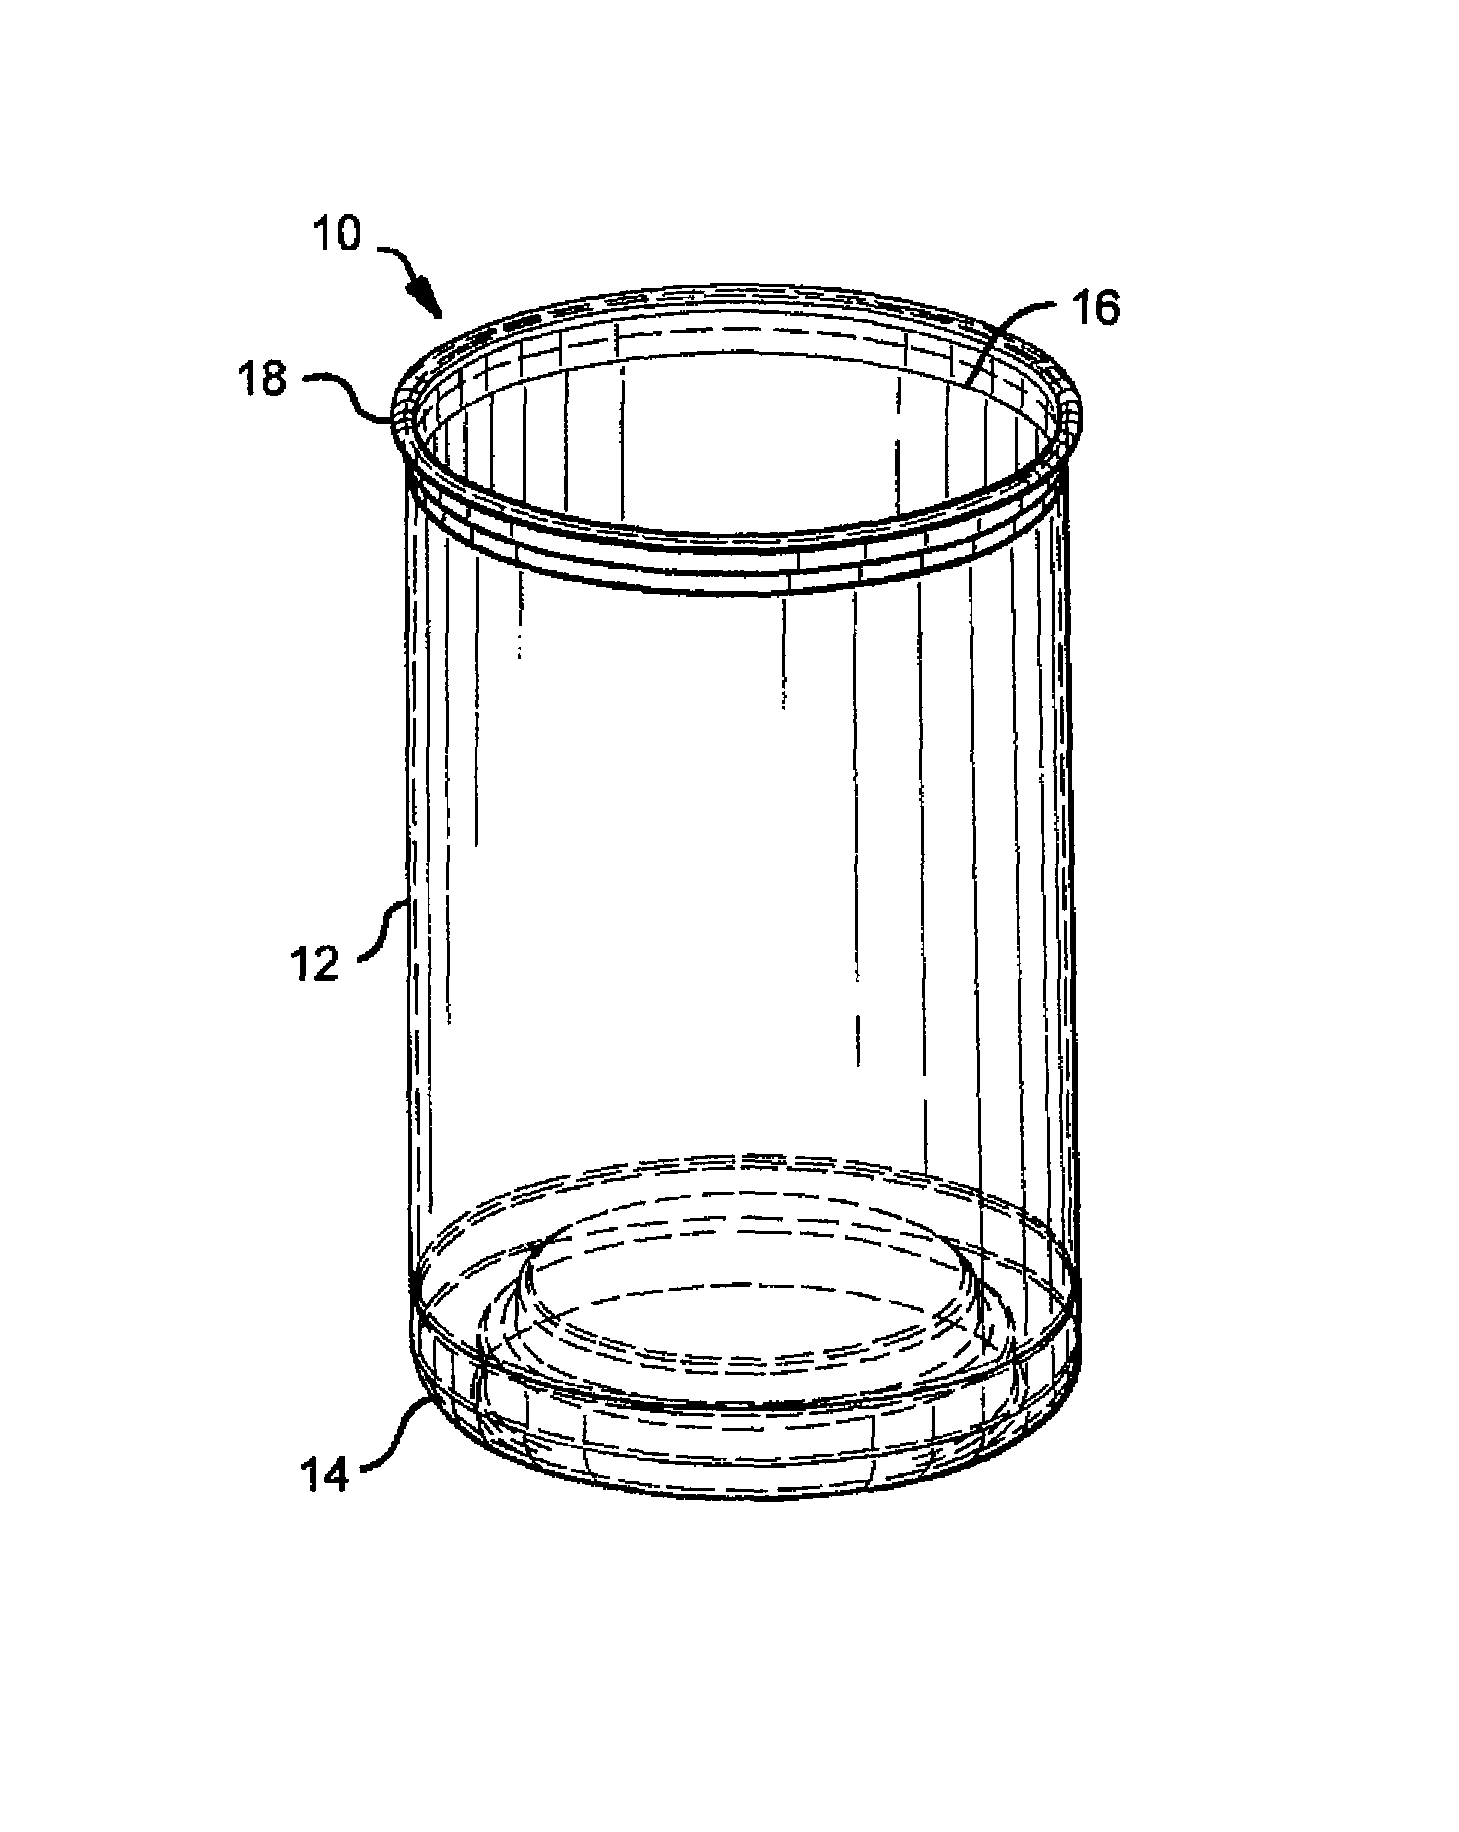 Pet containers with enhanced thermal properties